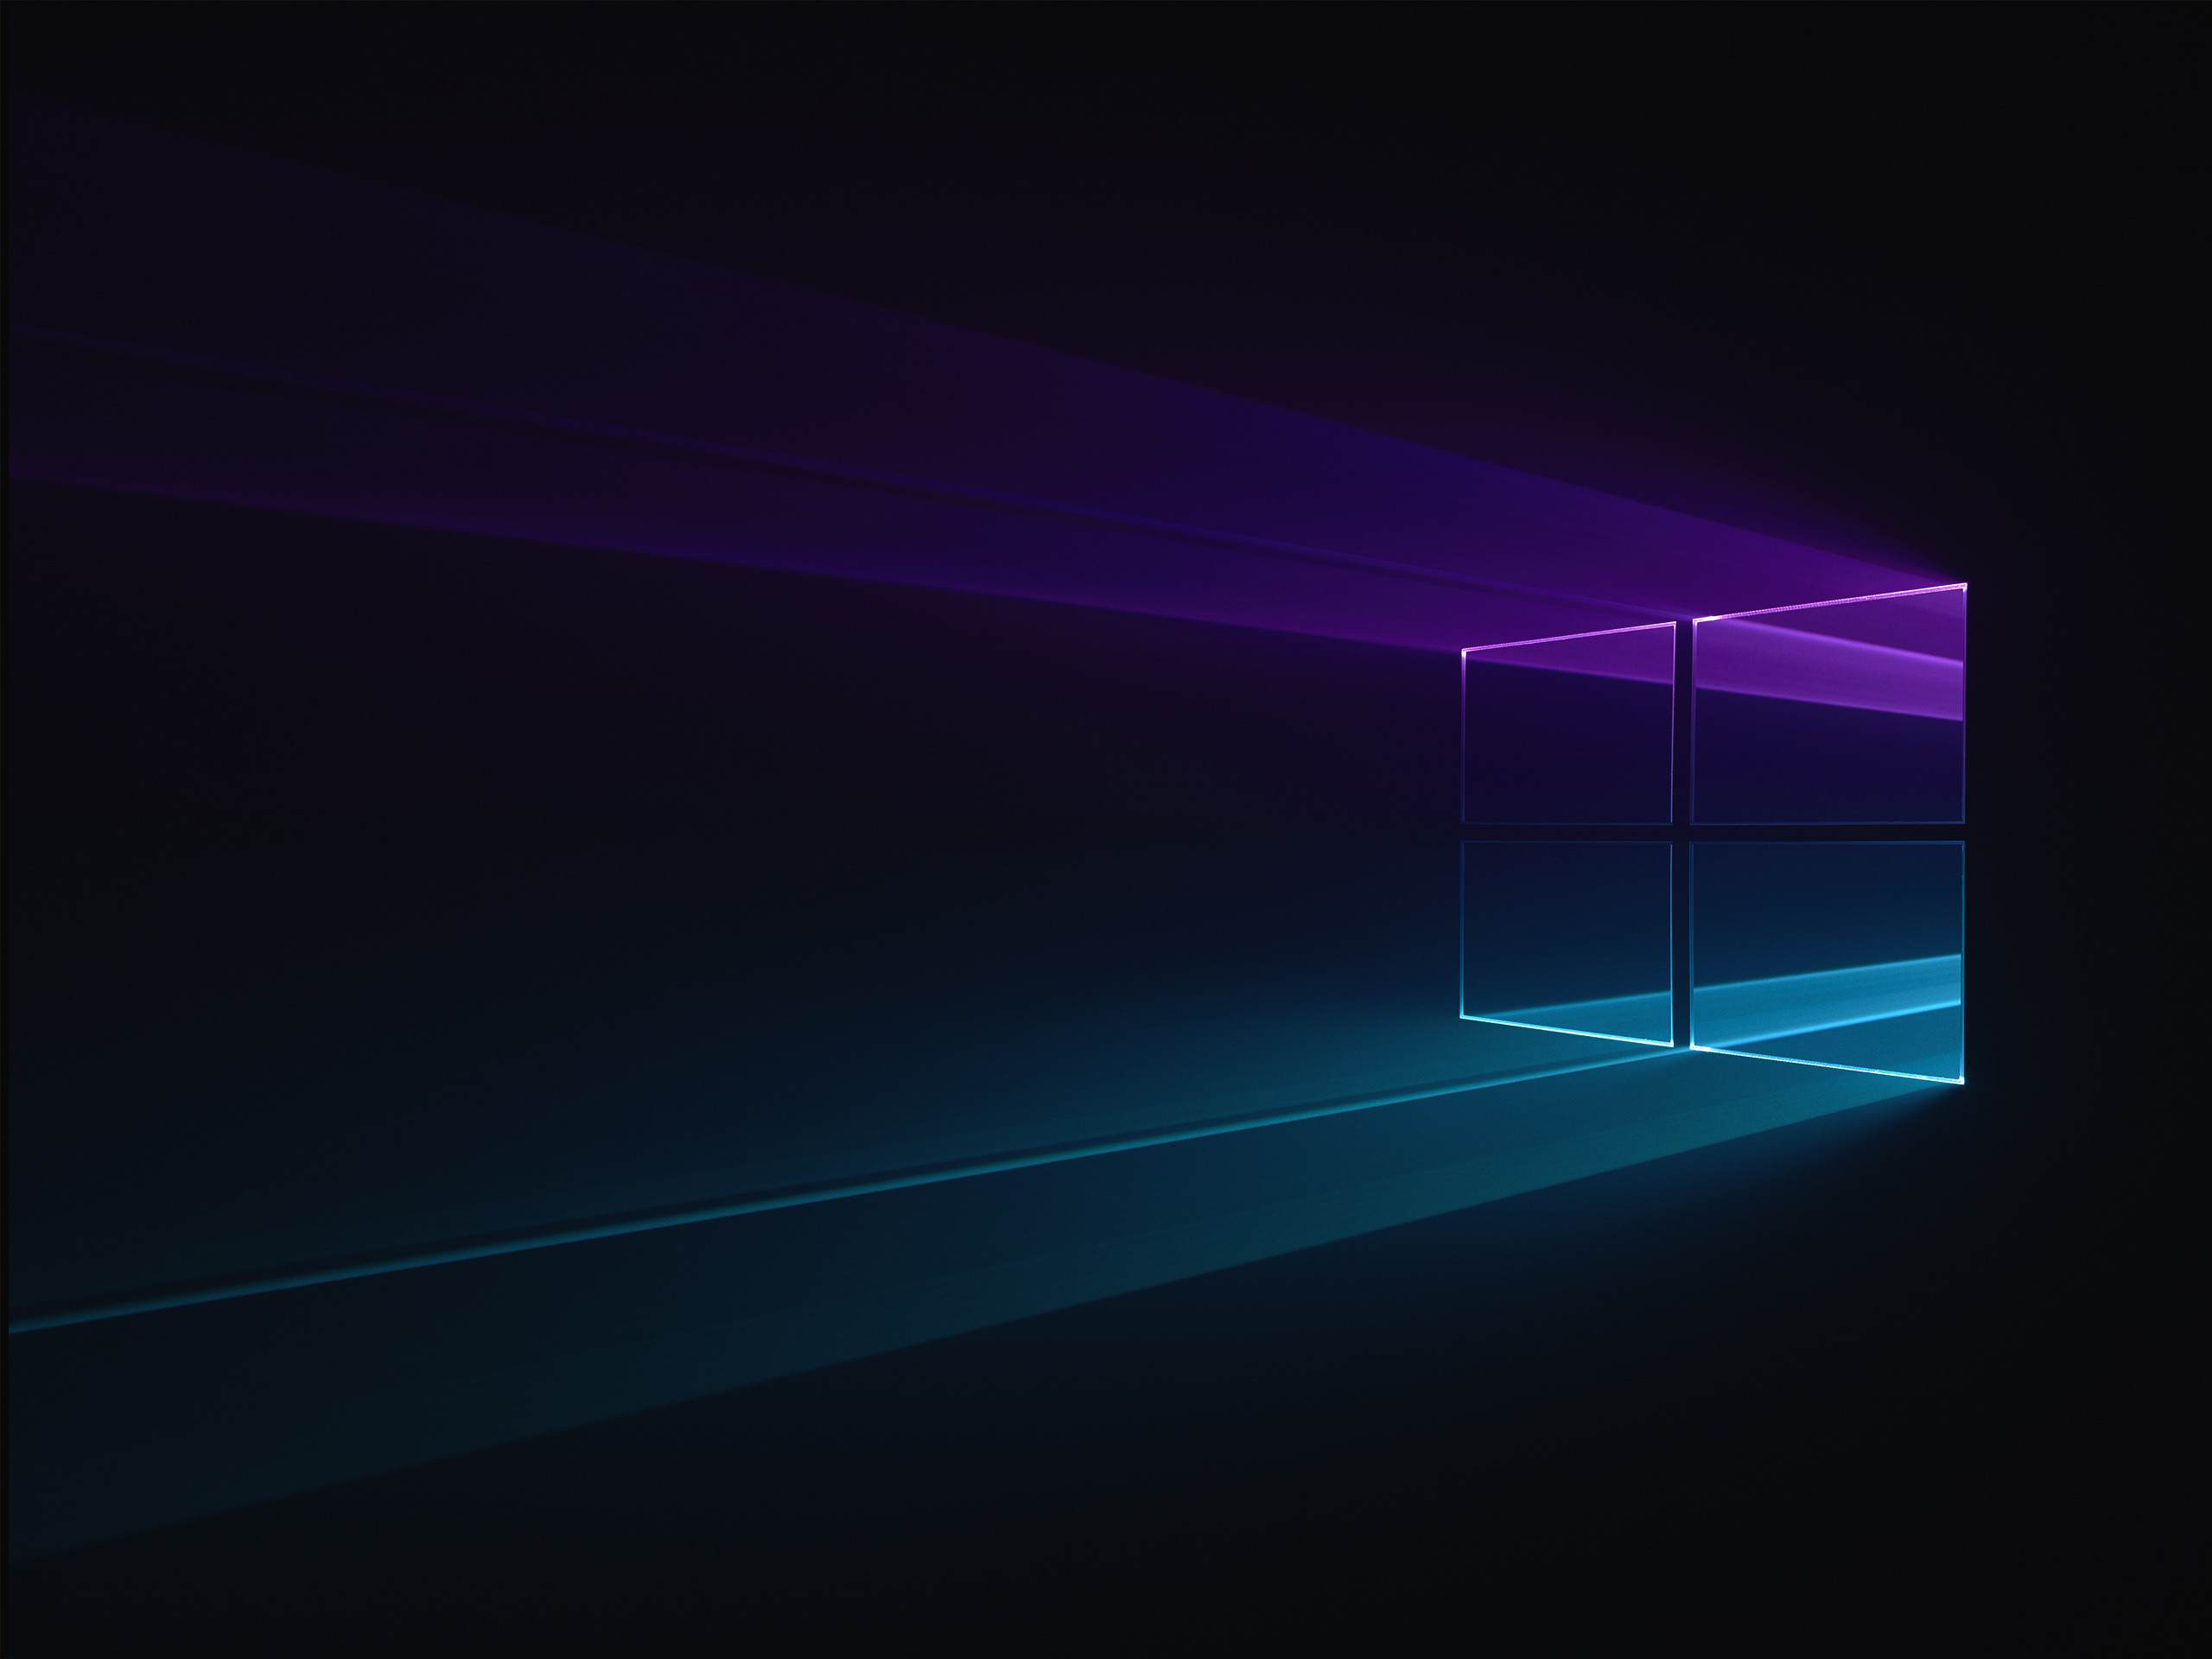 2560x1920 Windows 10 Desktop Www Gmunk The Projector Beams Were Complimented With A  Natural Fog That Brought ...